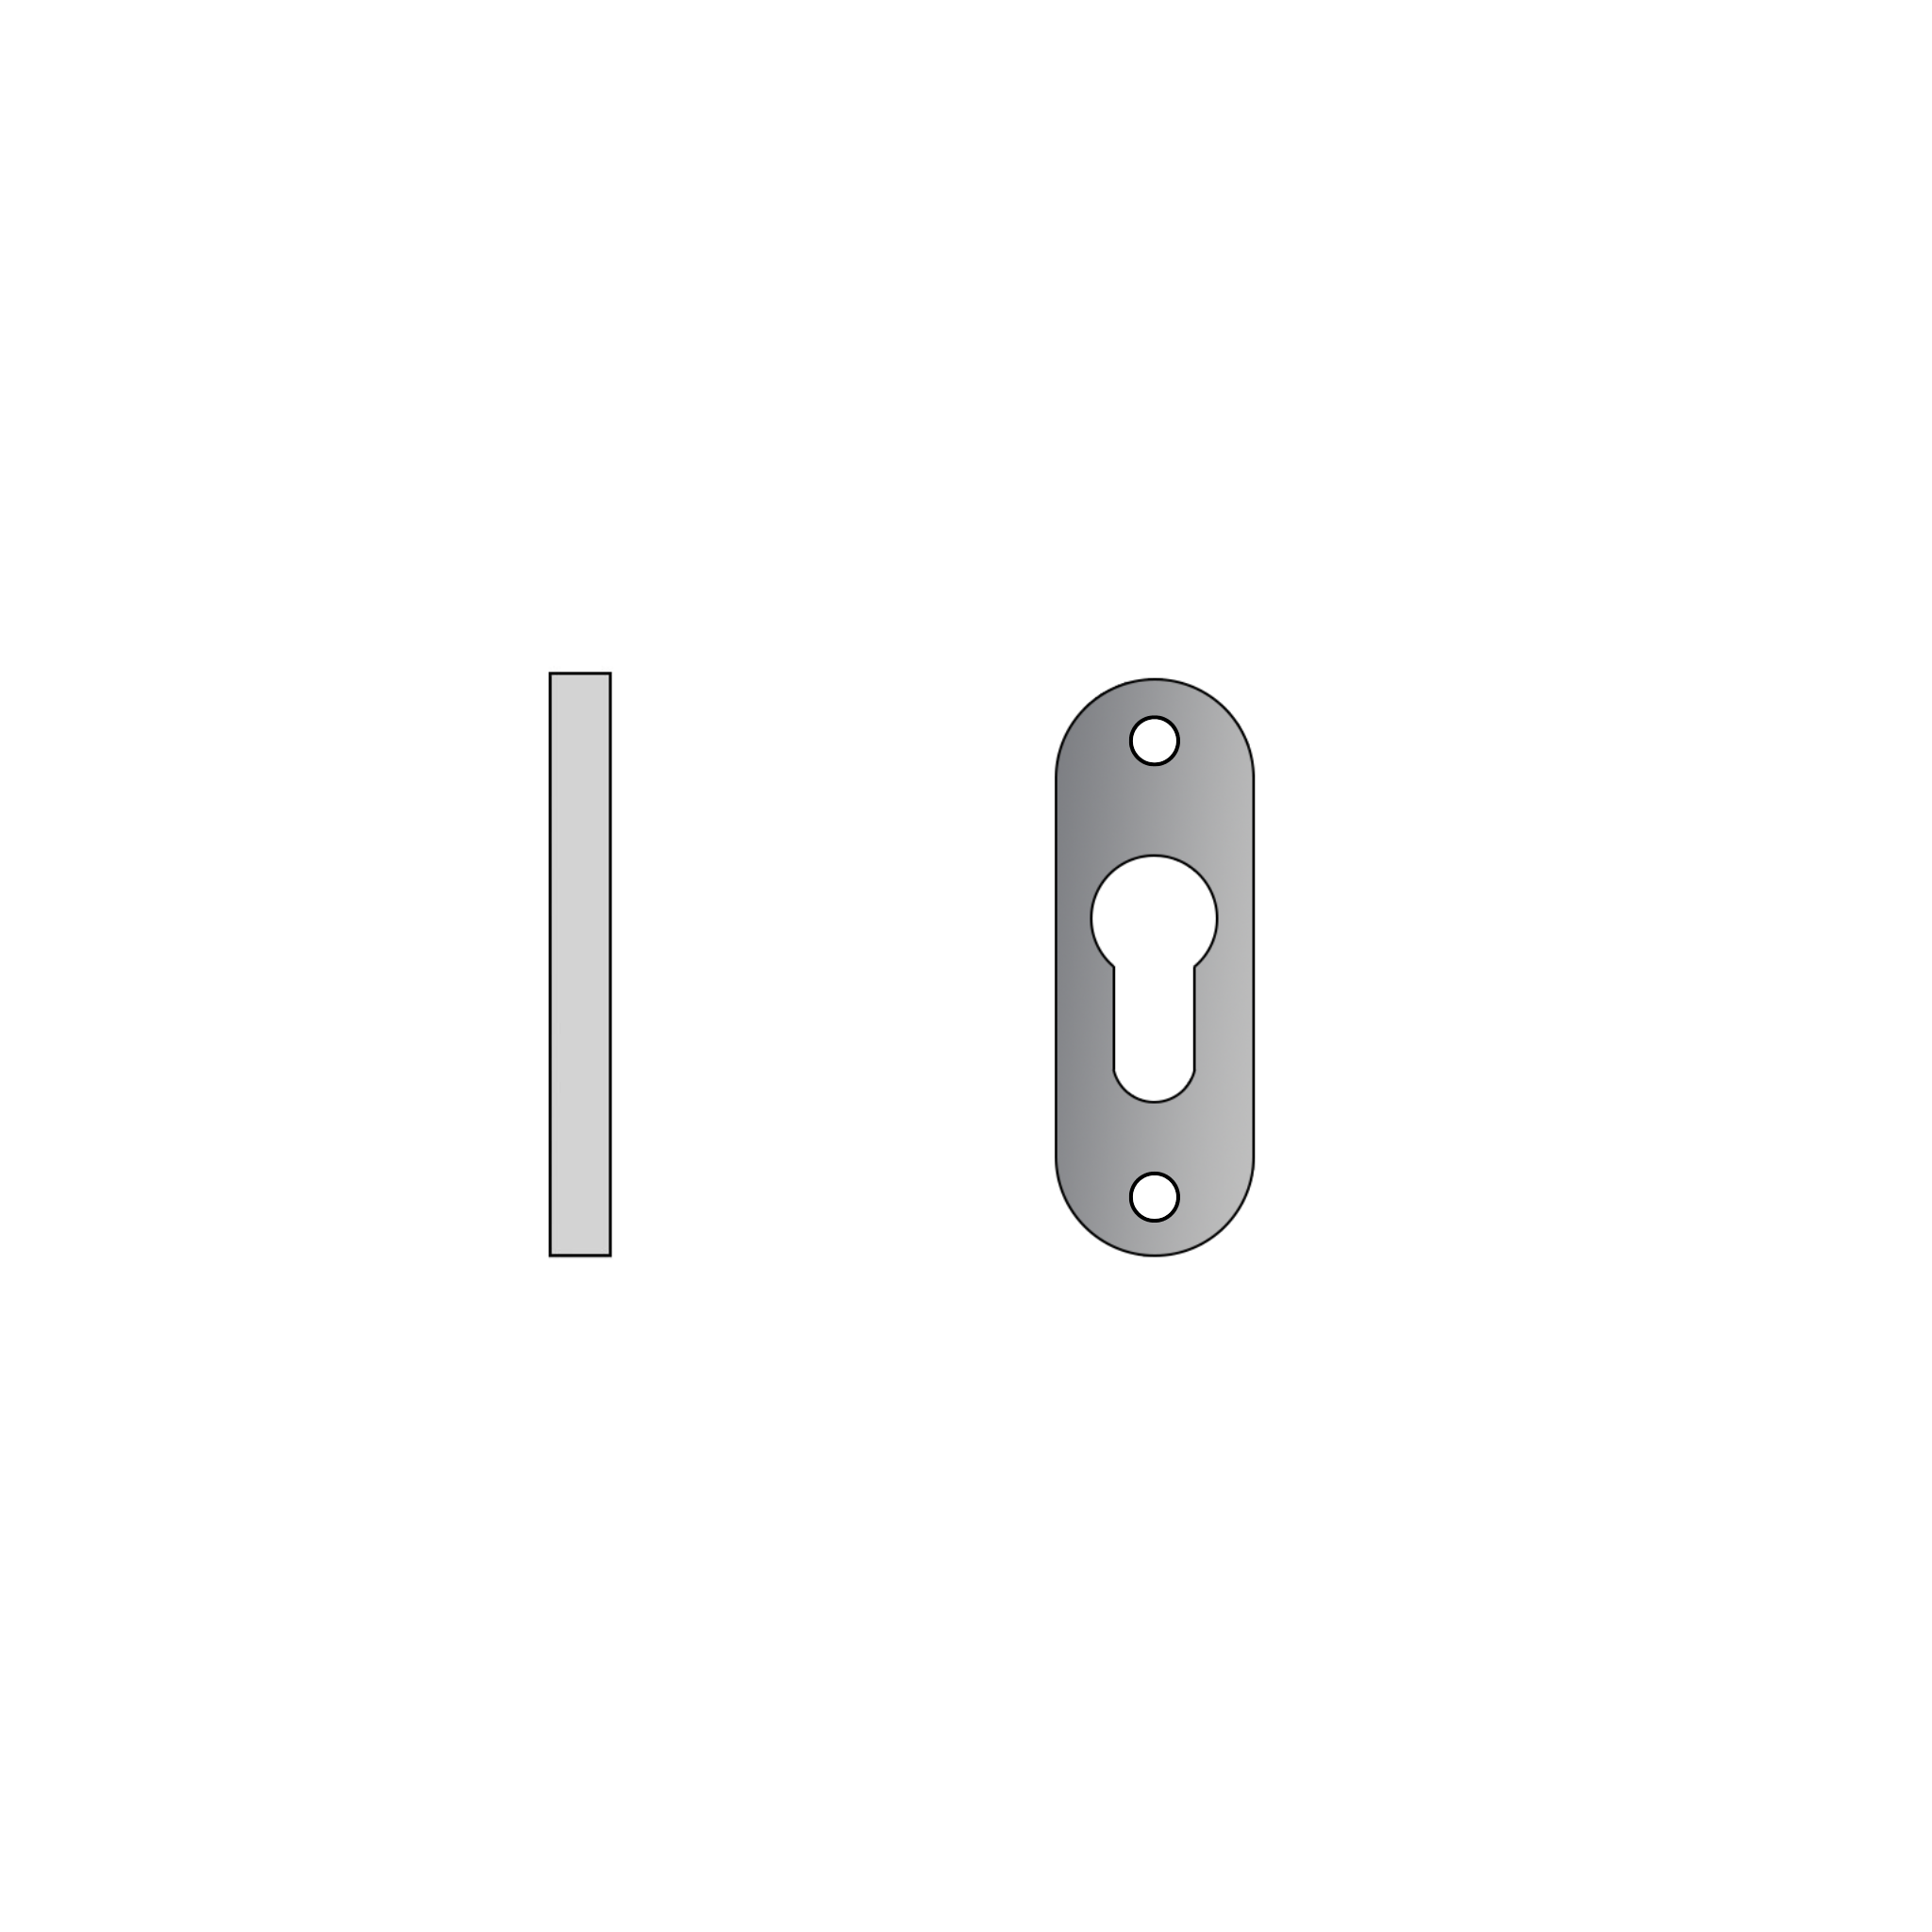 QS4407, Cylinder Escutcheon, Flush Oval Rose, 64mm (h) x 30mm (w) x 2mm (t), Stainless Steel, QS